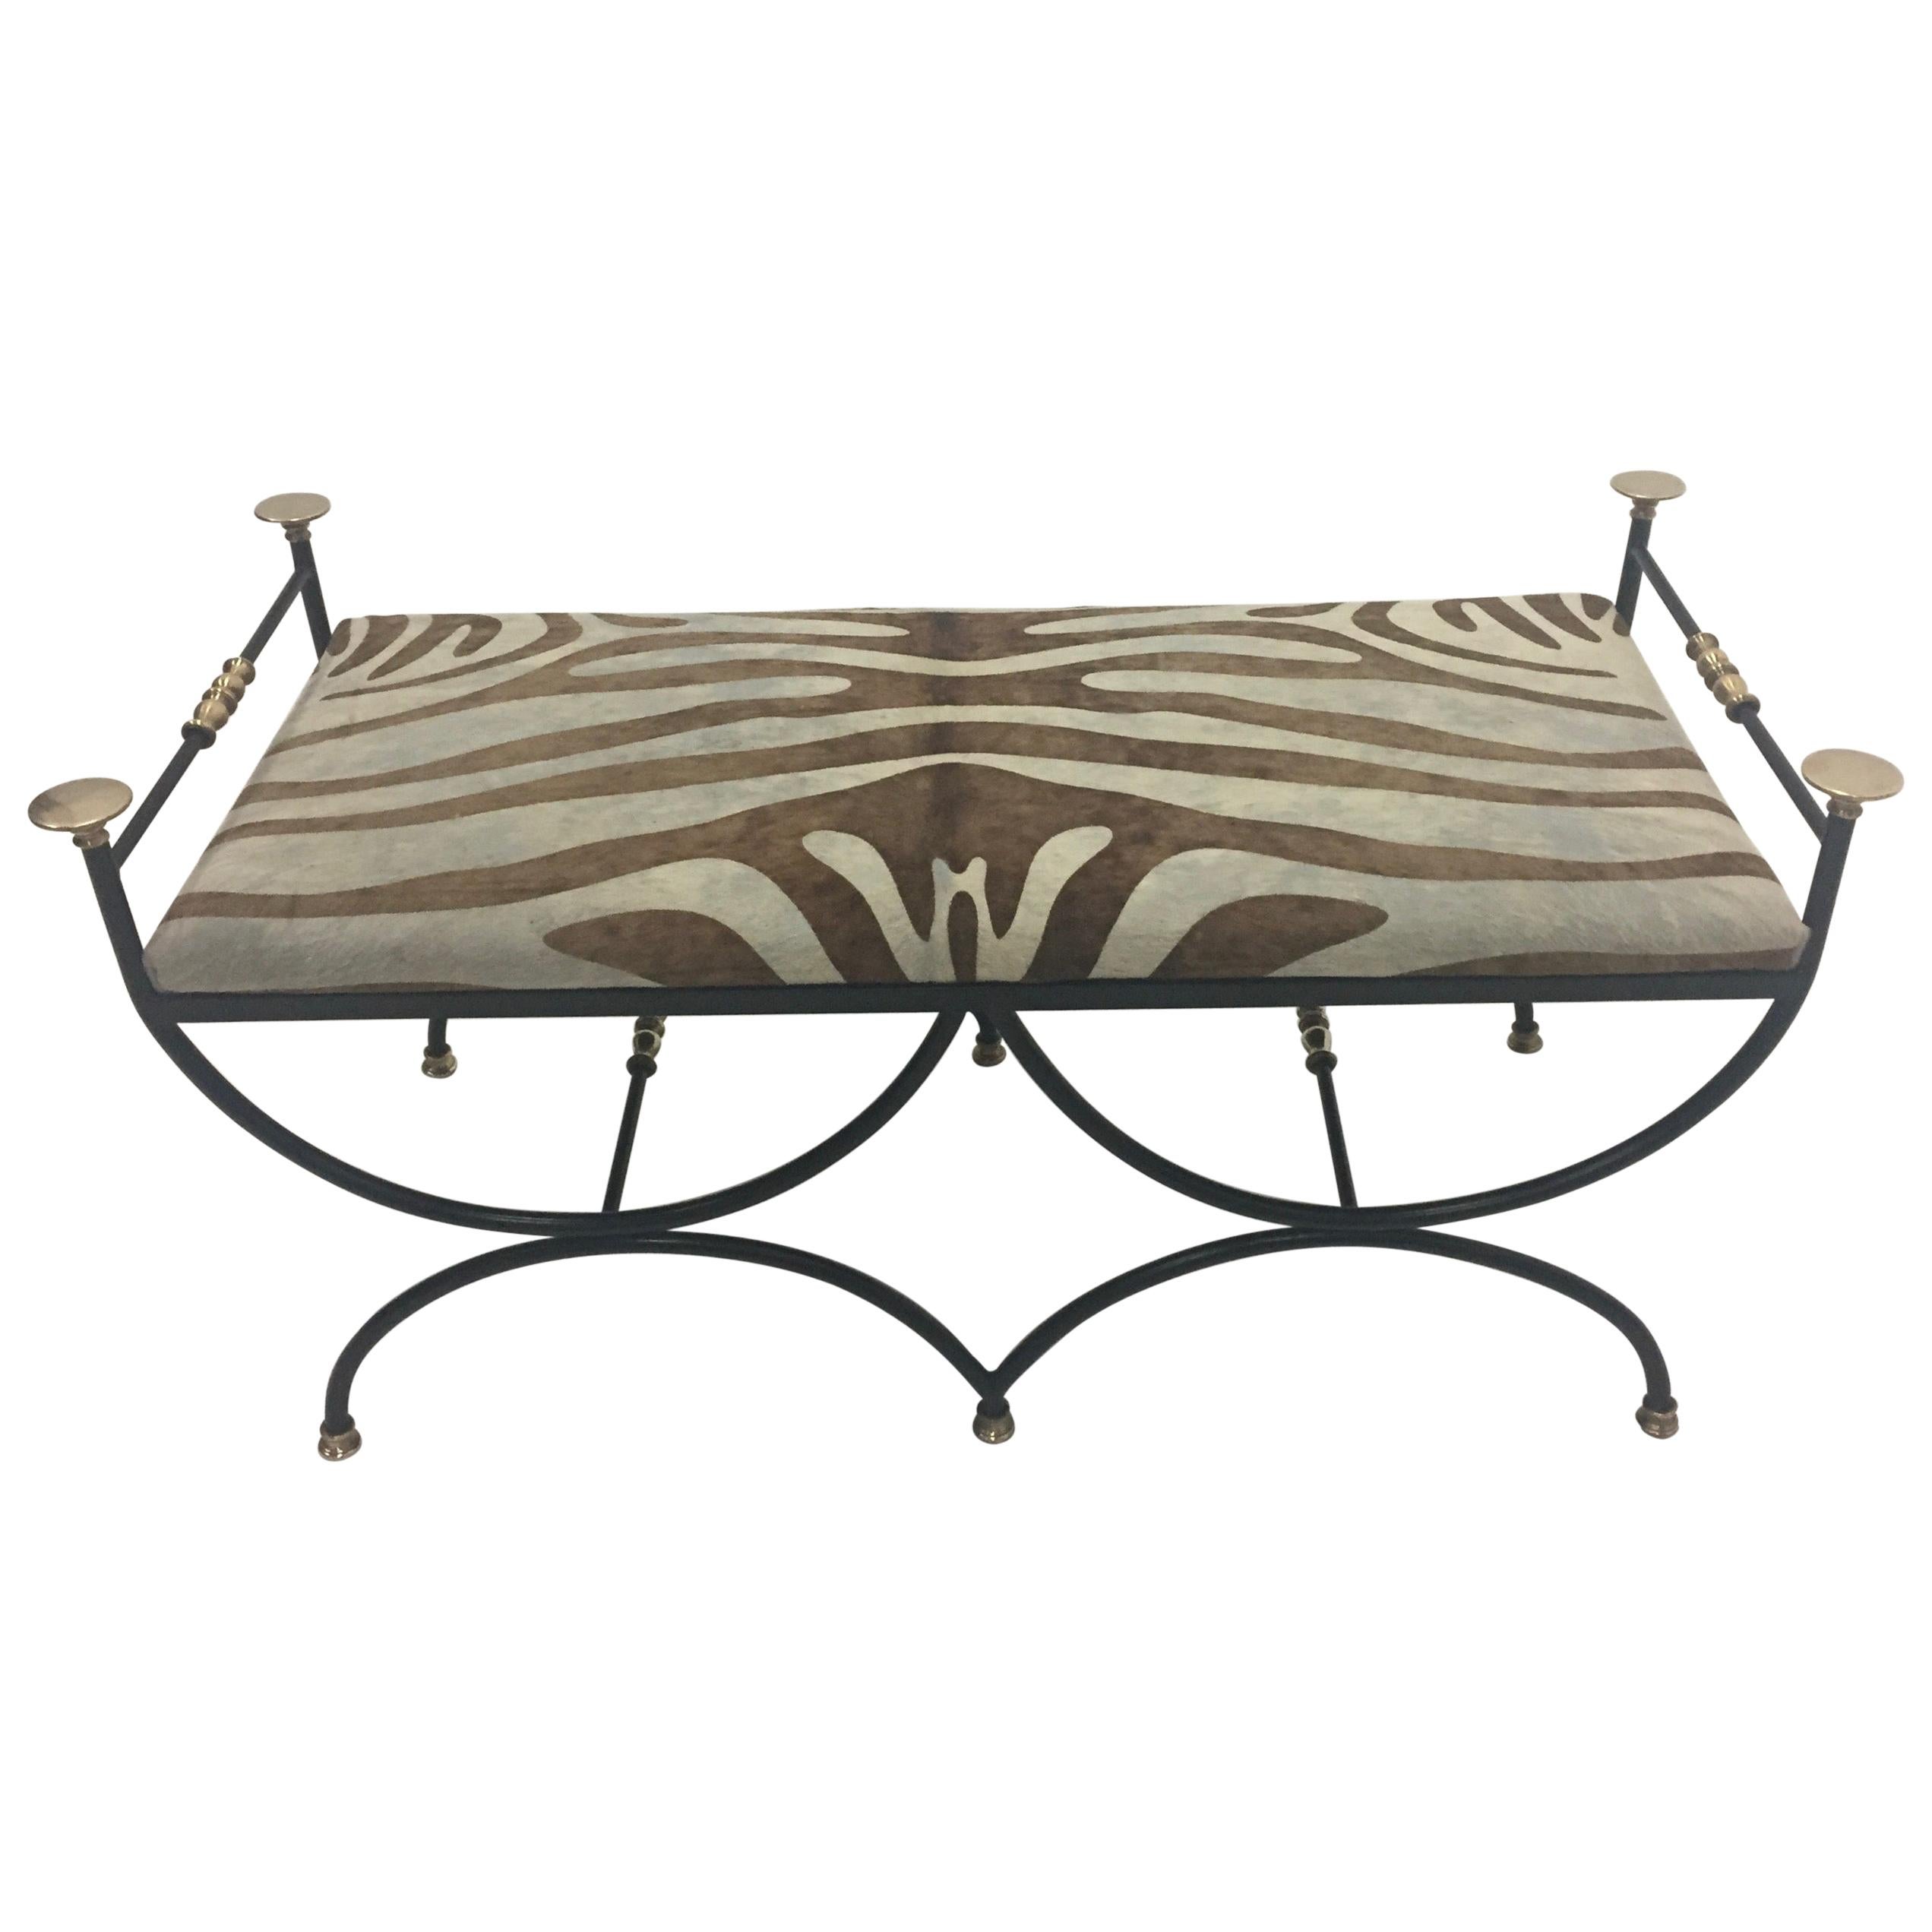 Italian Vintage Wrought Iron Brass and Cowhide Bench